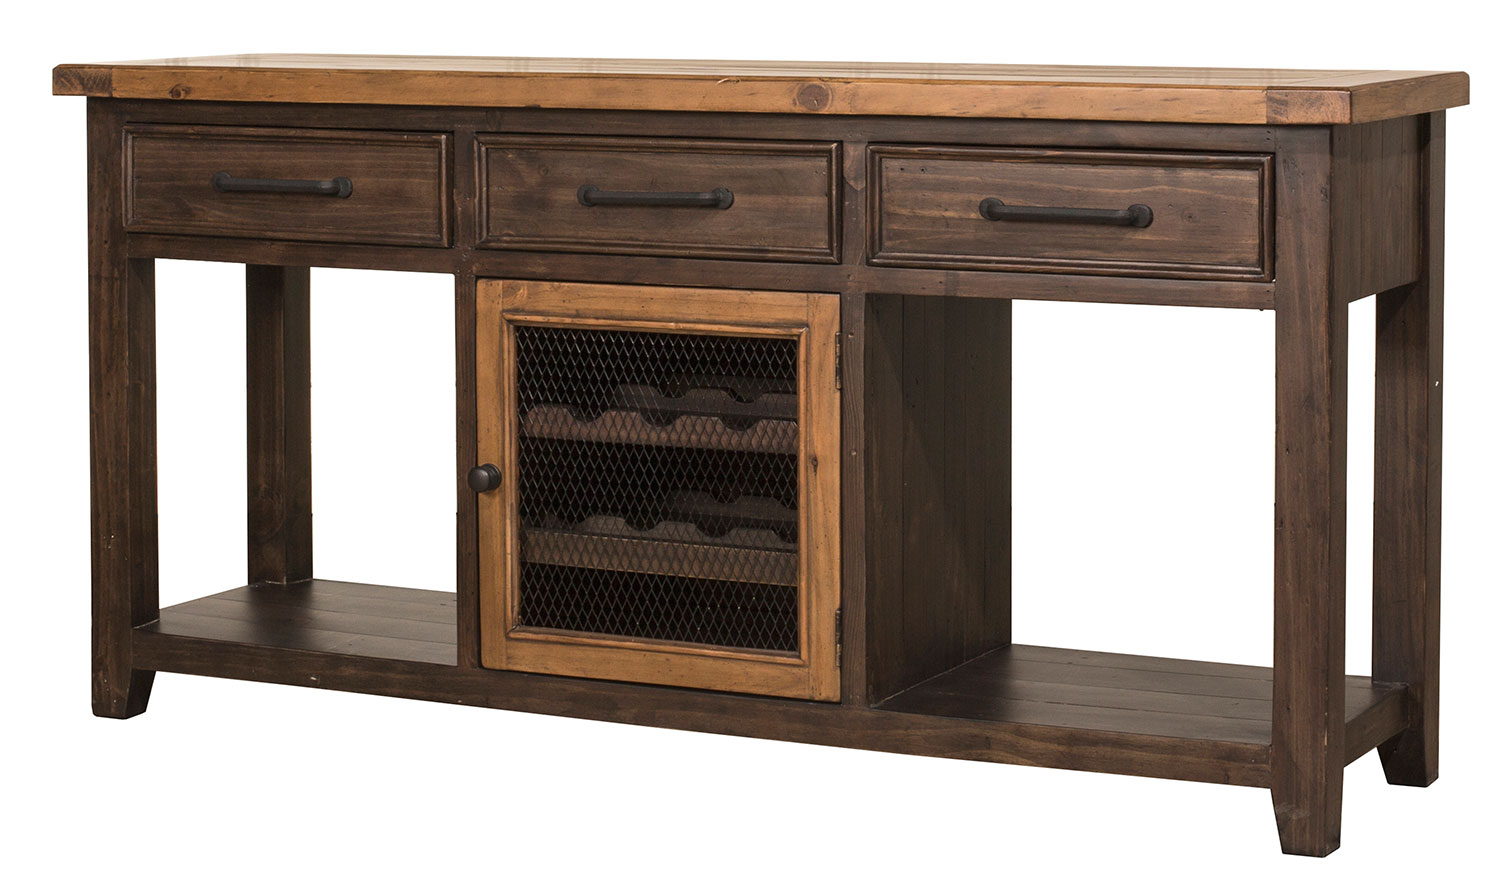 Hillsdale Tuscan Retreat Sofa Table with Wine Rack and 2-Basket - Cafe/Bronze